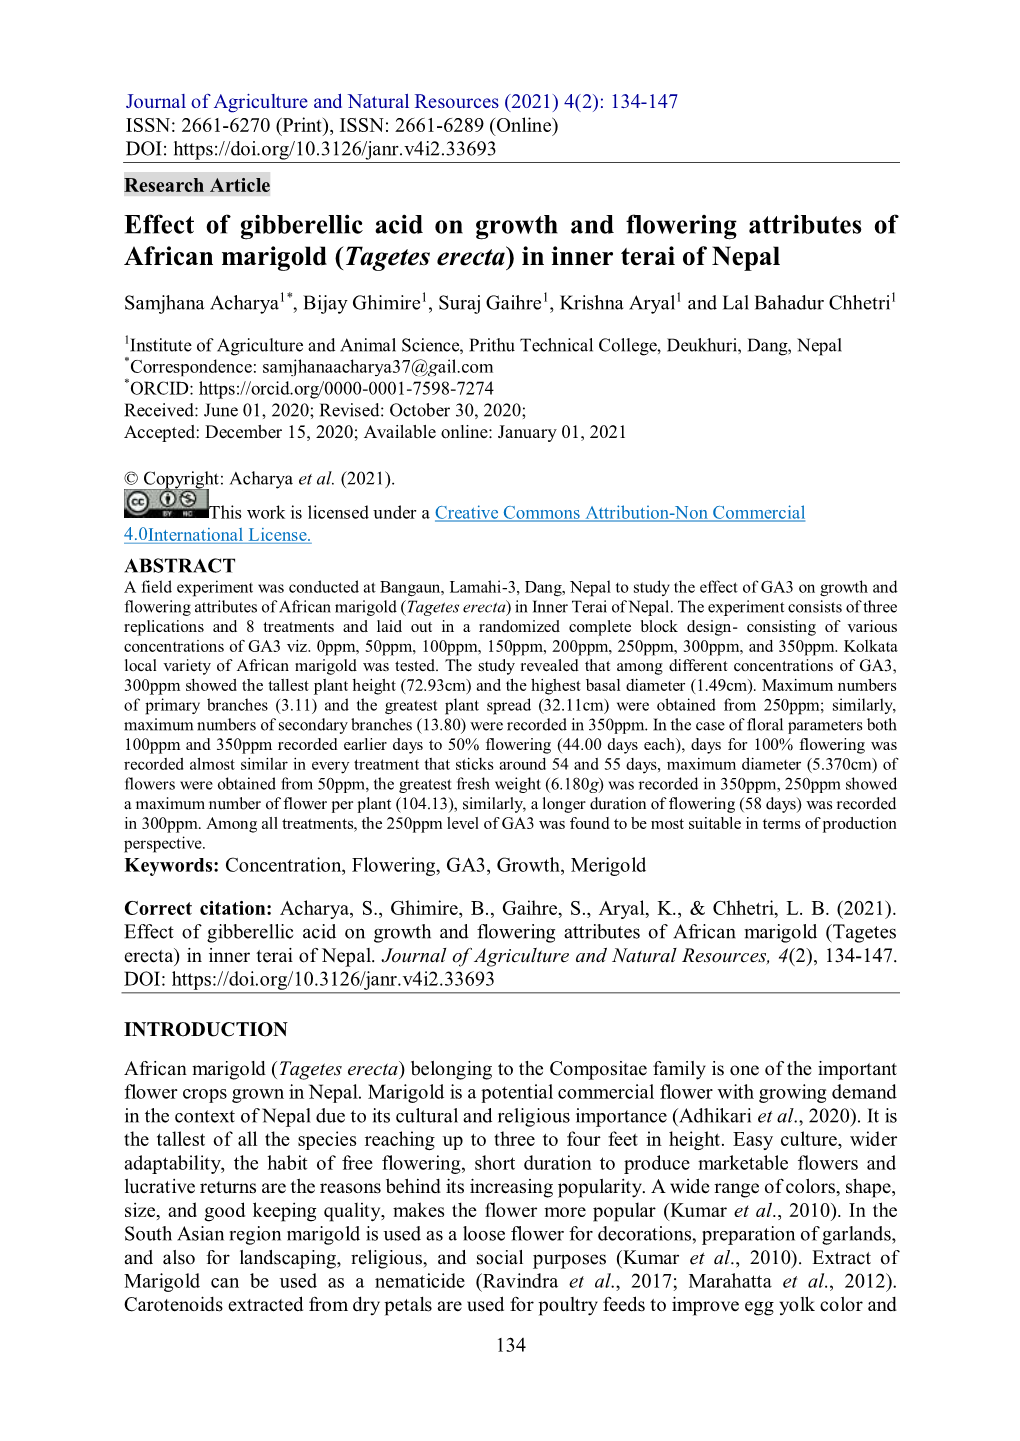 Effect of Gibberellic Acid on Growth and Flowering Attributes of African Marigold (Tagetes Erecta) in Inner Terai of Nepal